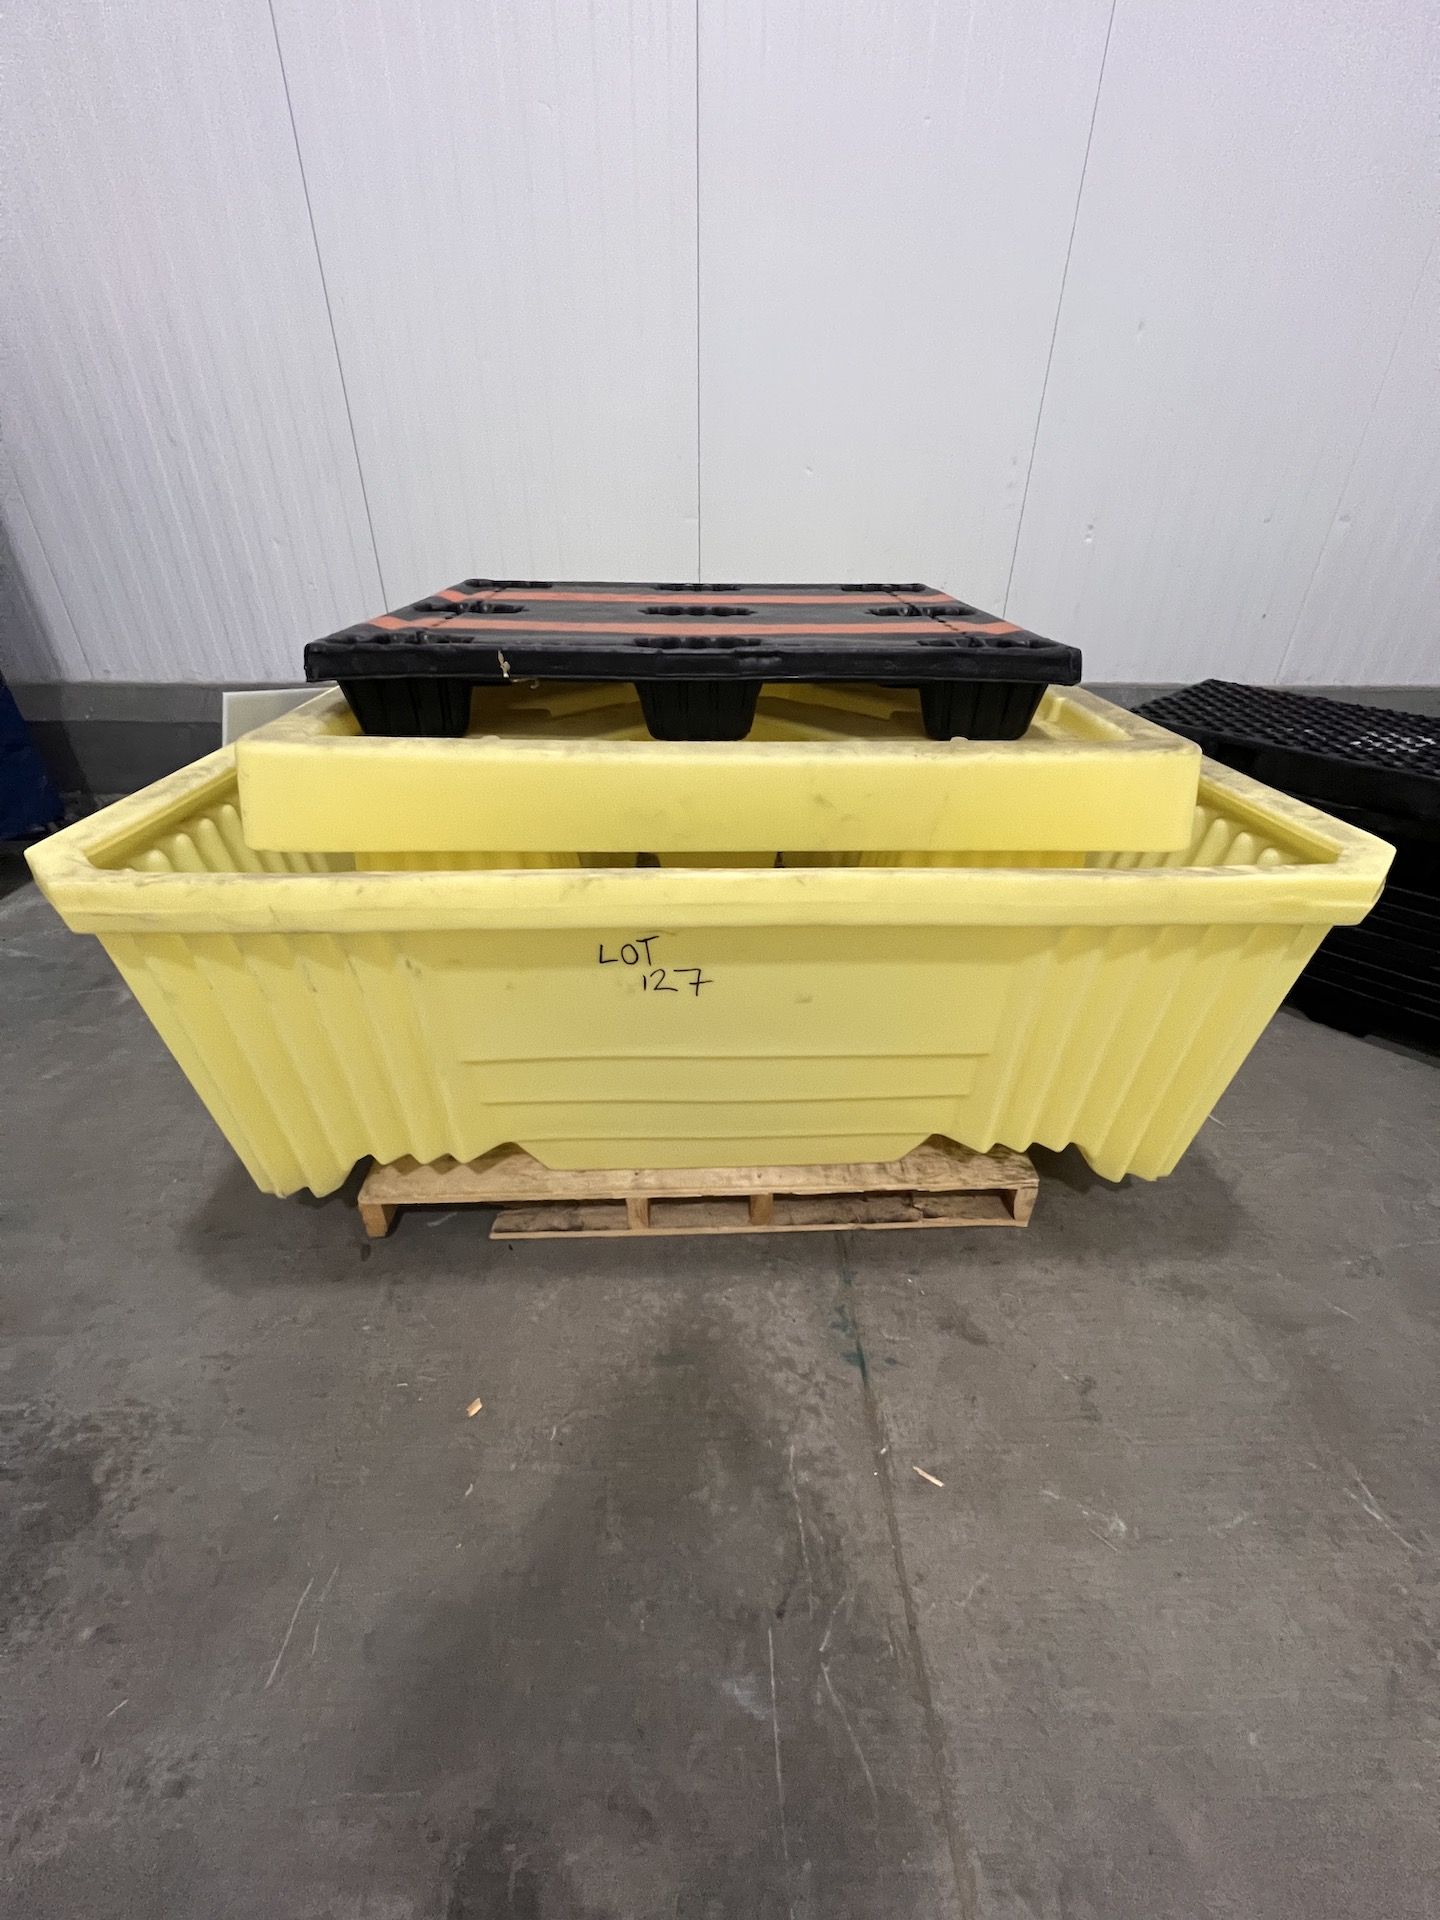 ULINE IBC SPILL CONTAINMENT SUMP, H-4436 (RIGGING & SIMPLE LOADING FEE $25.00) (NOTE: DOES NOT